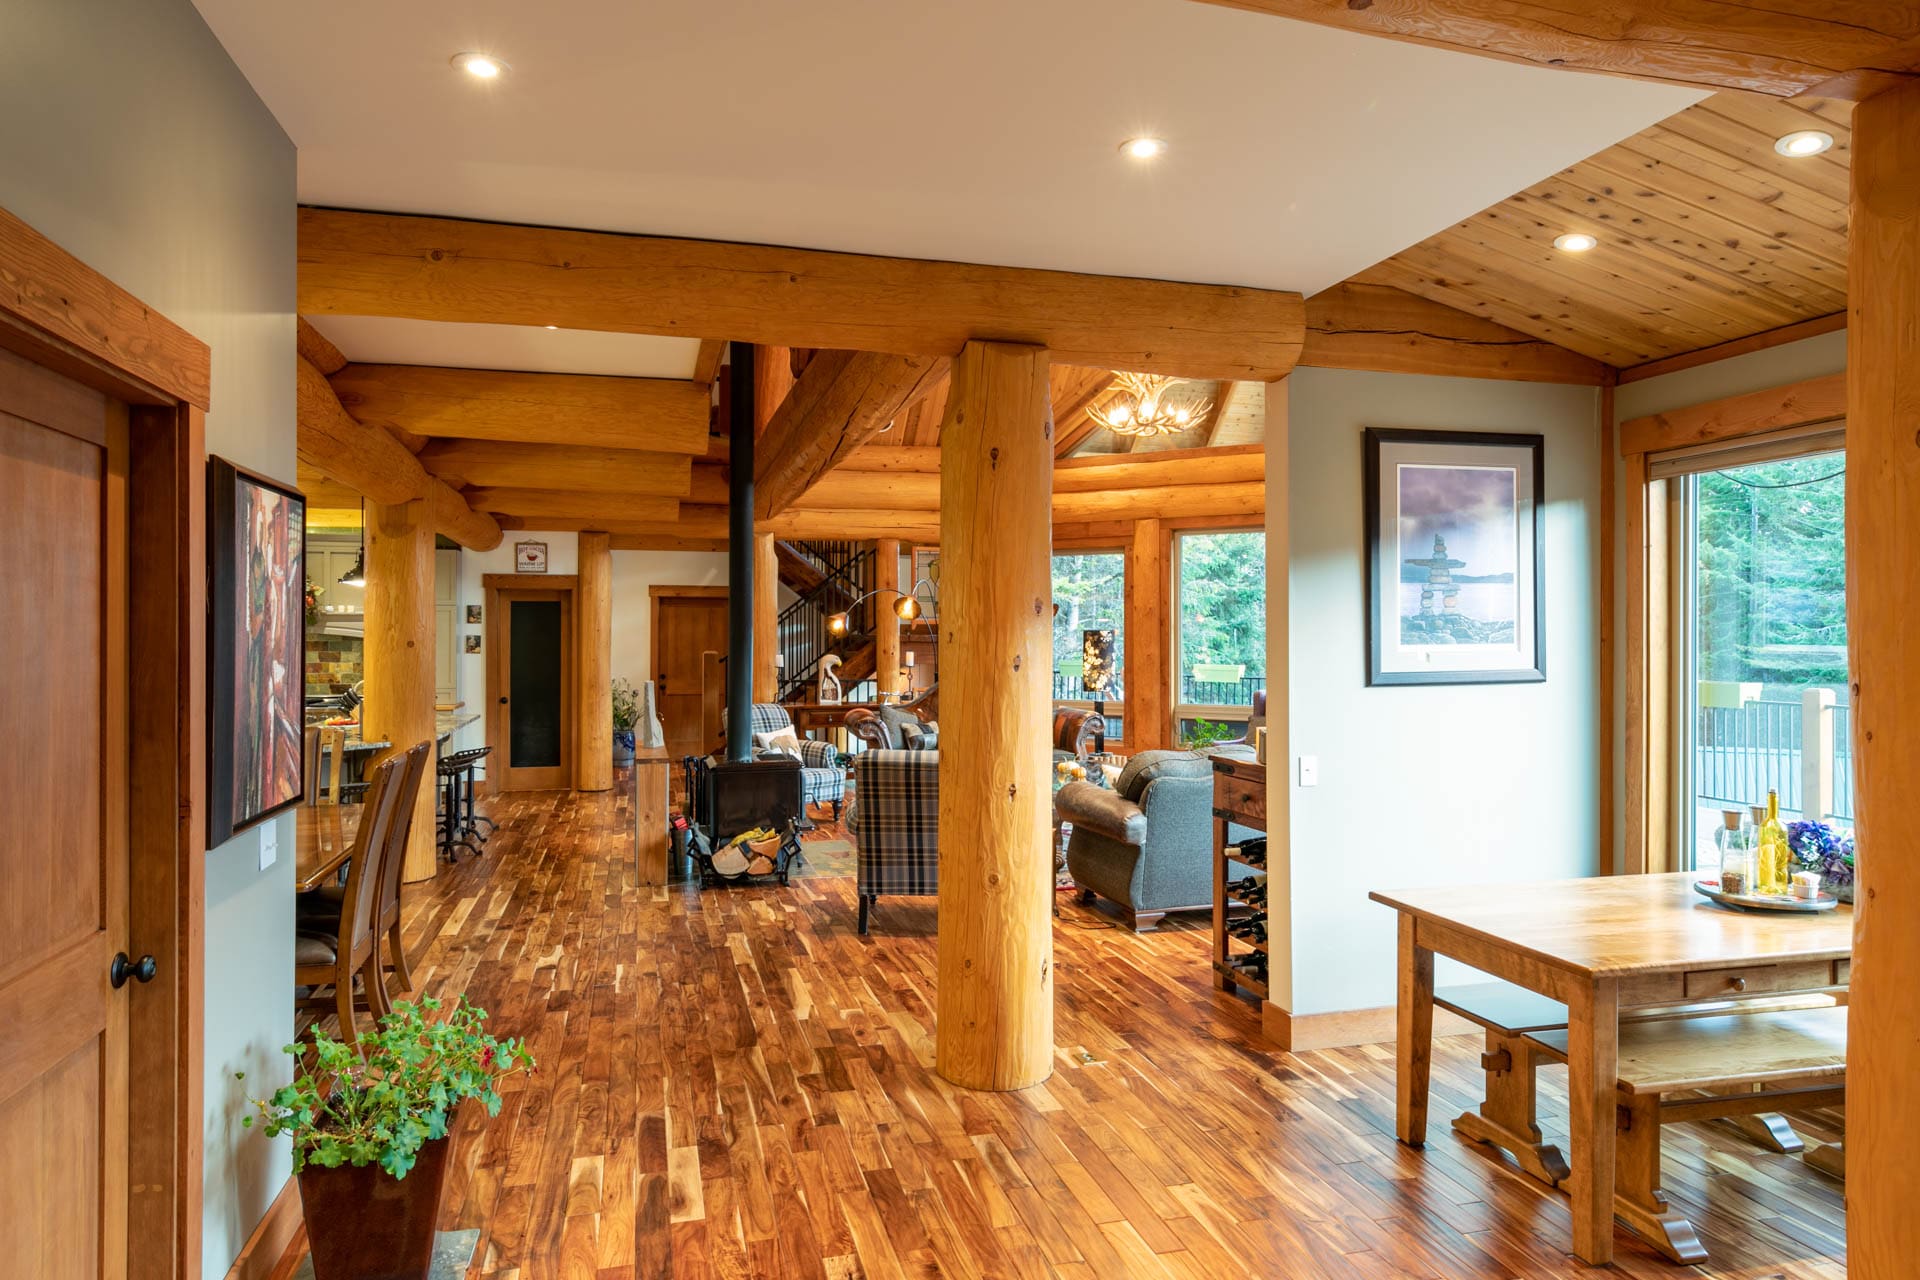 Golden Acres post and beam log home interior.